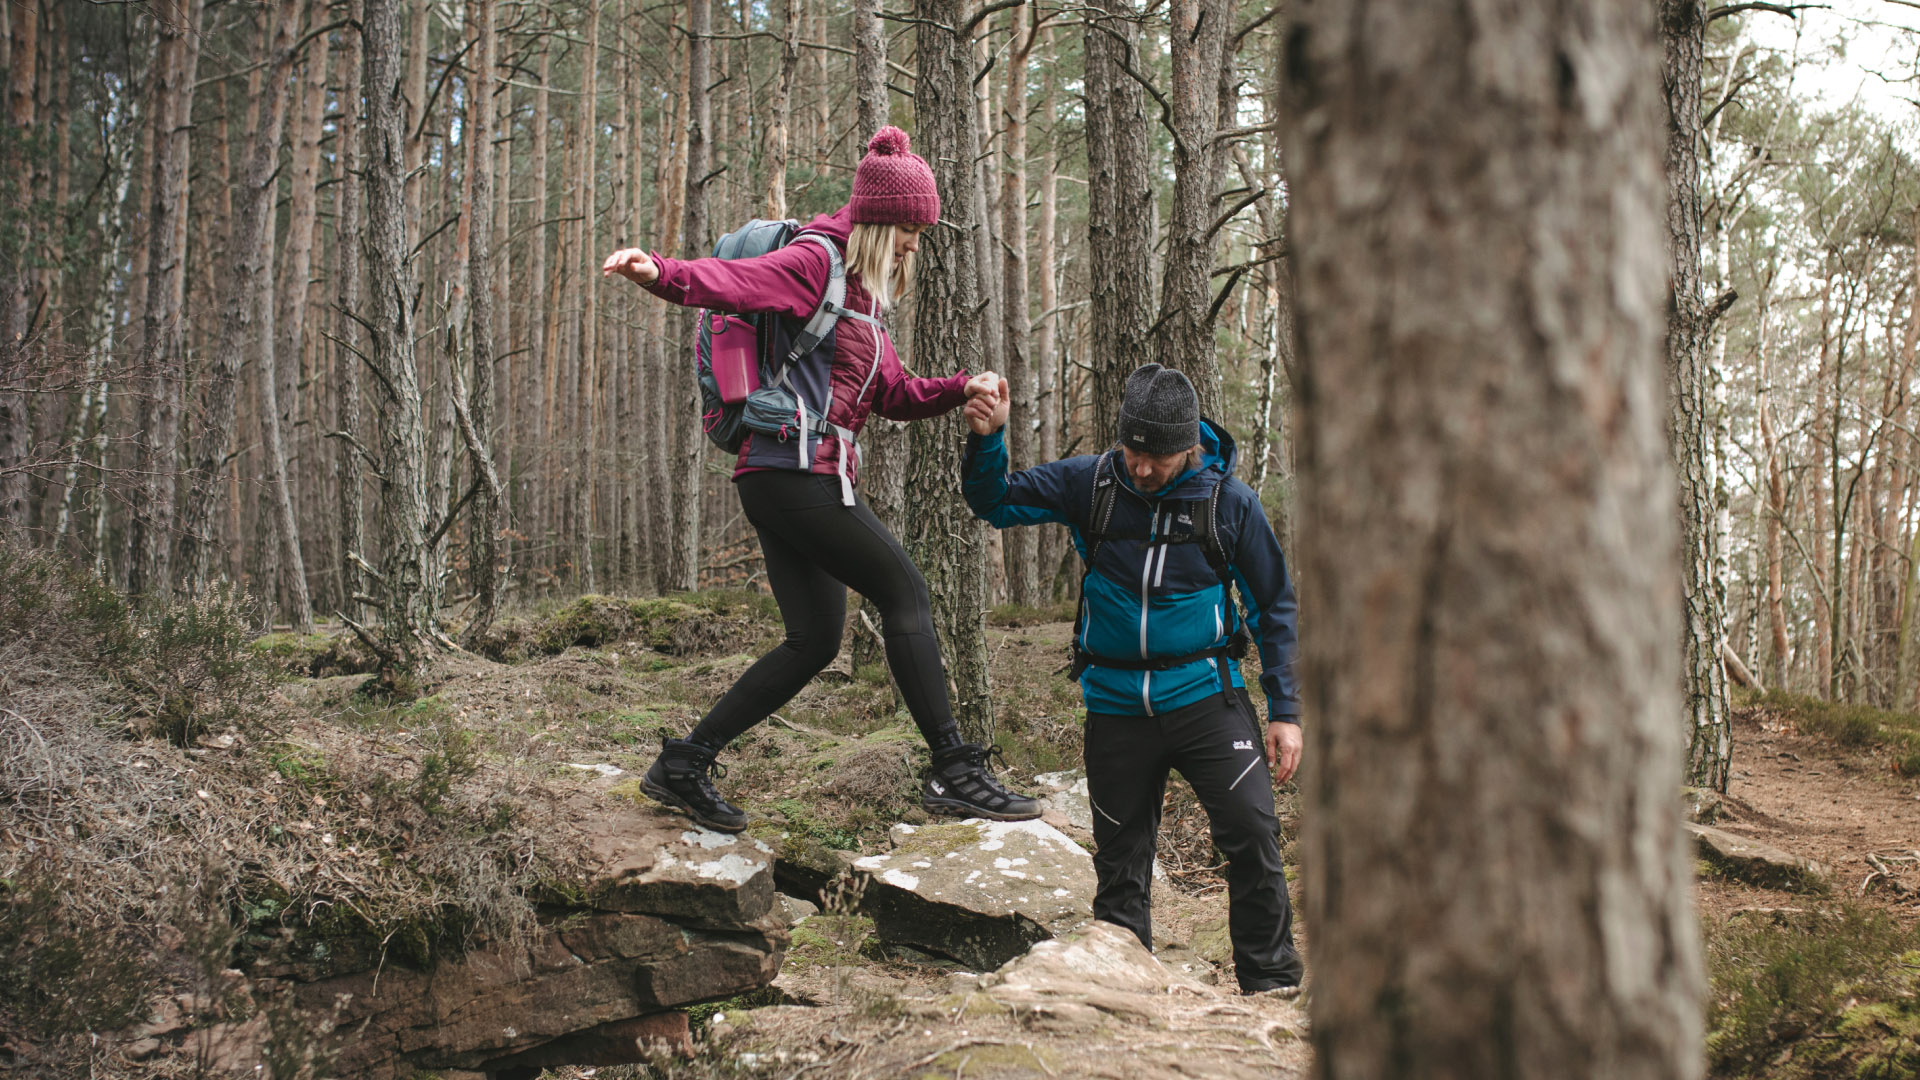 Woman and Men are wearing Jack Wolfskin Backpack and Jacket in ornage and blue